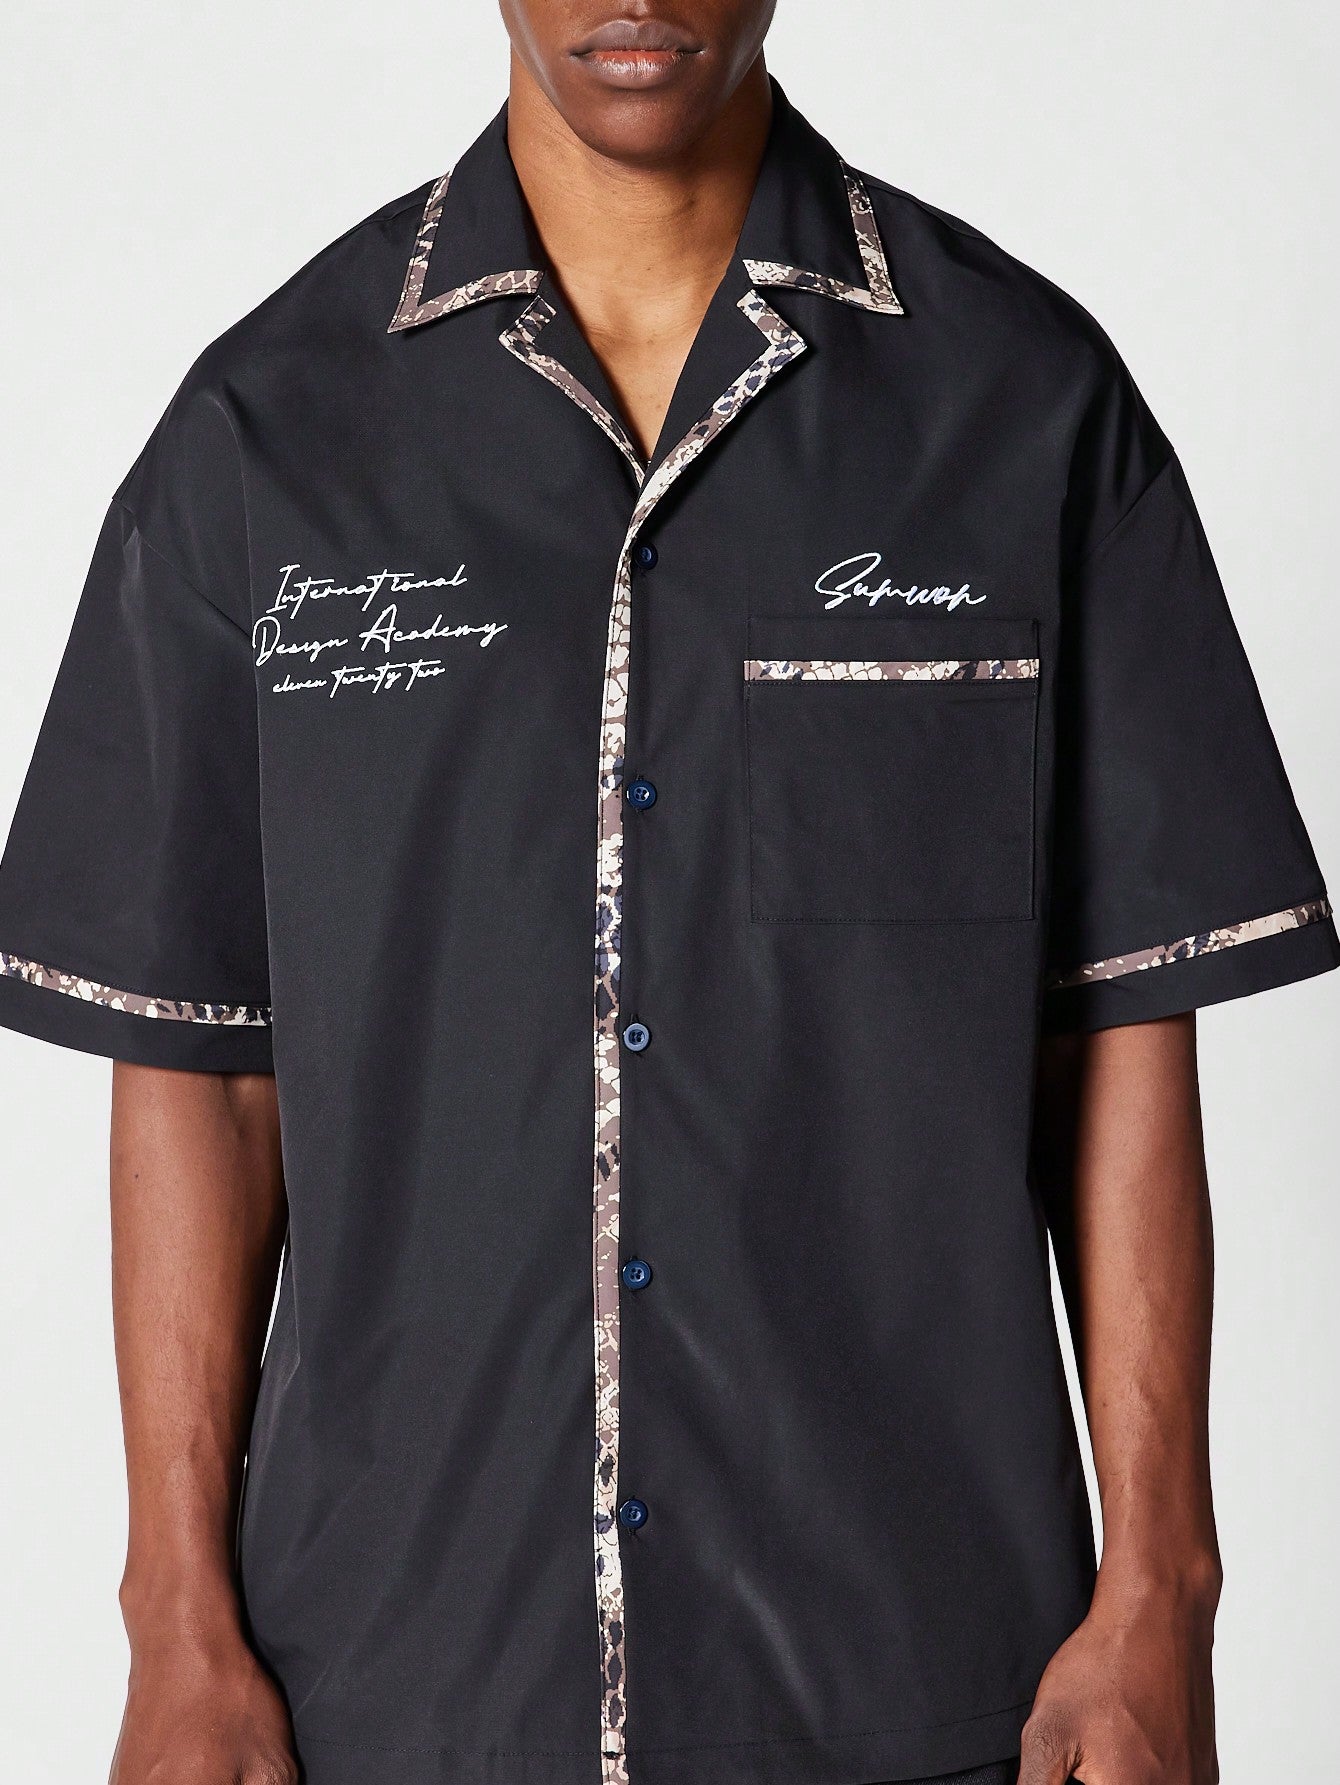 Revere Collar Shirt With Printed Piping Details And Front Embroidery